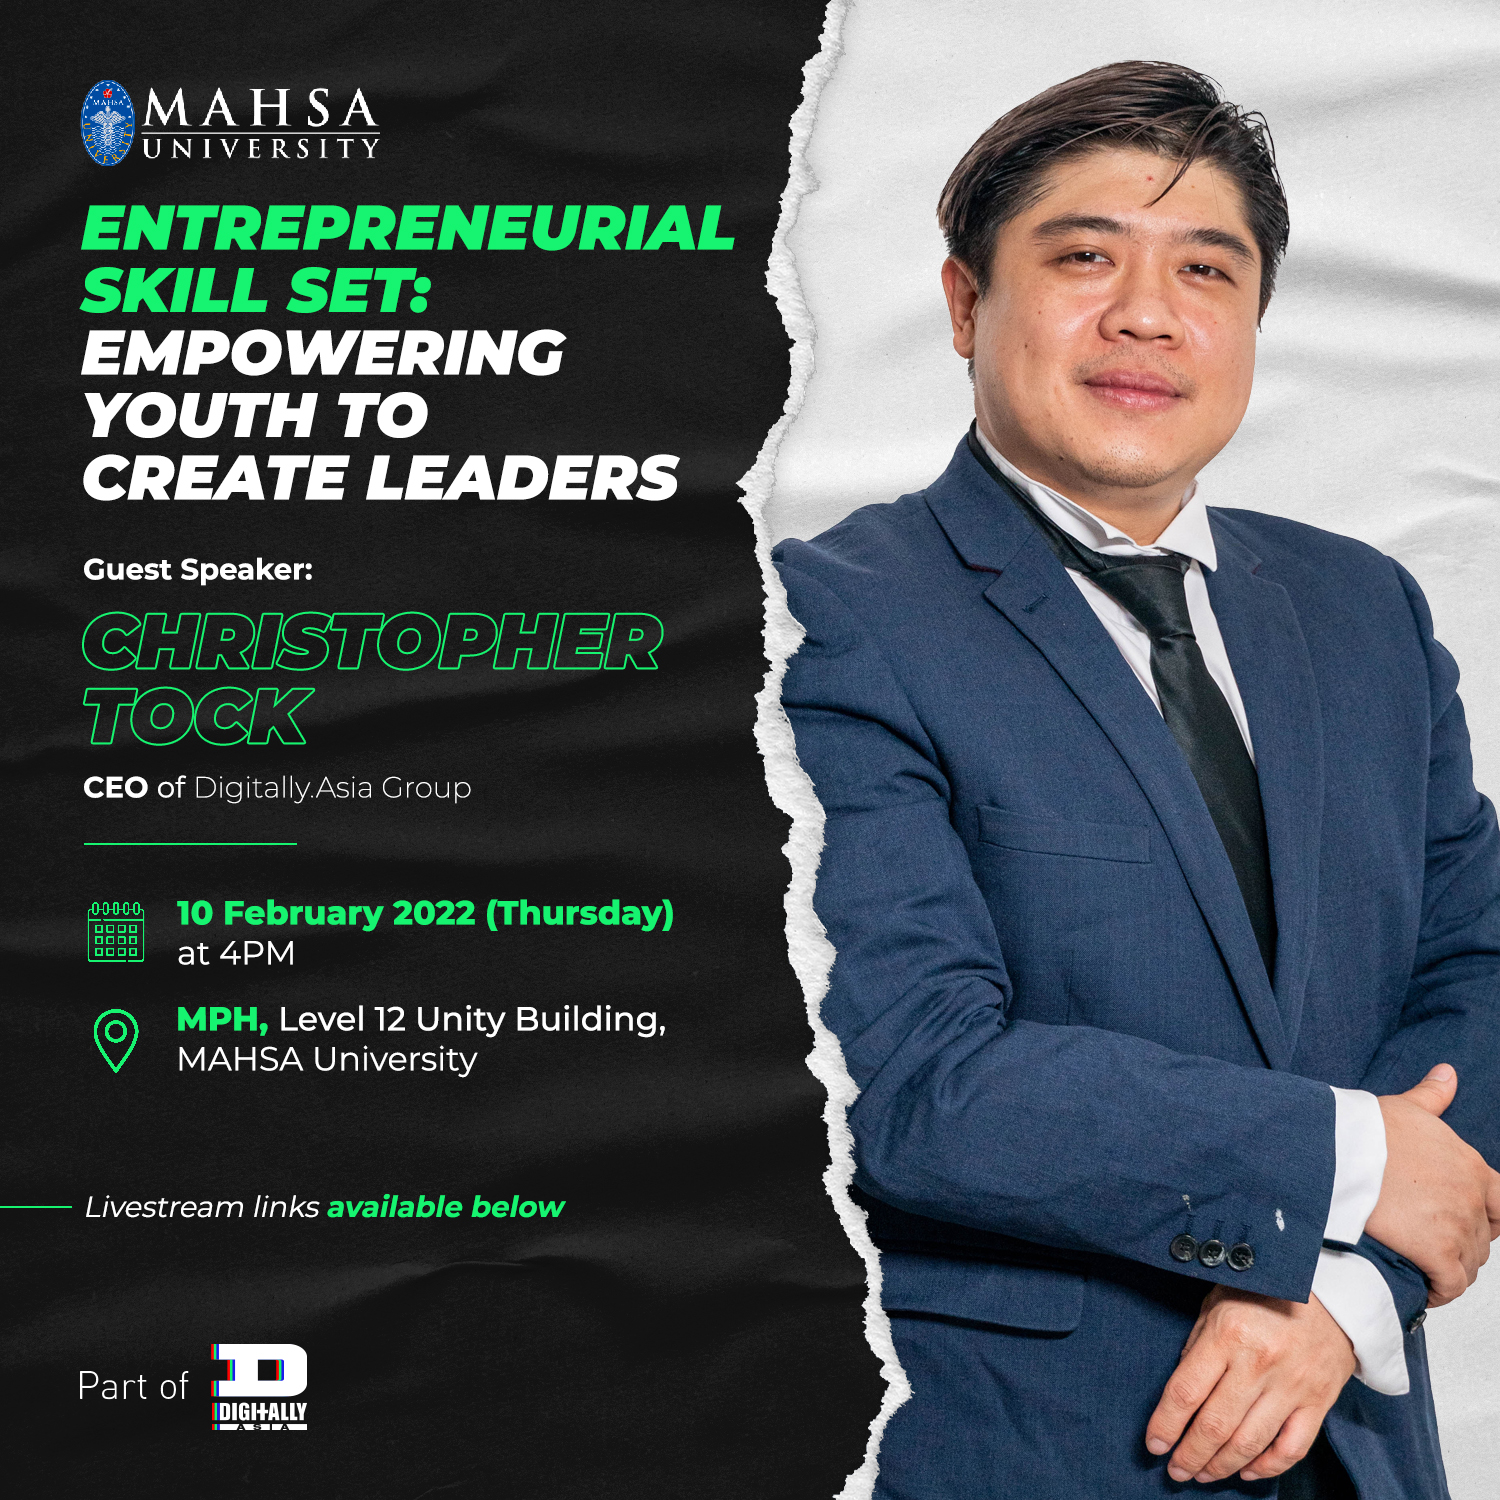 Christopher Tock is Invited as Guest Speaker for MAHSA University’s Entrepreneurial Skill Set: Empowering Youth to Create Leaders